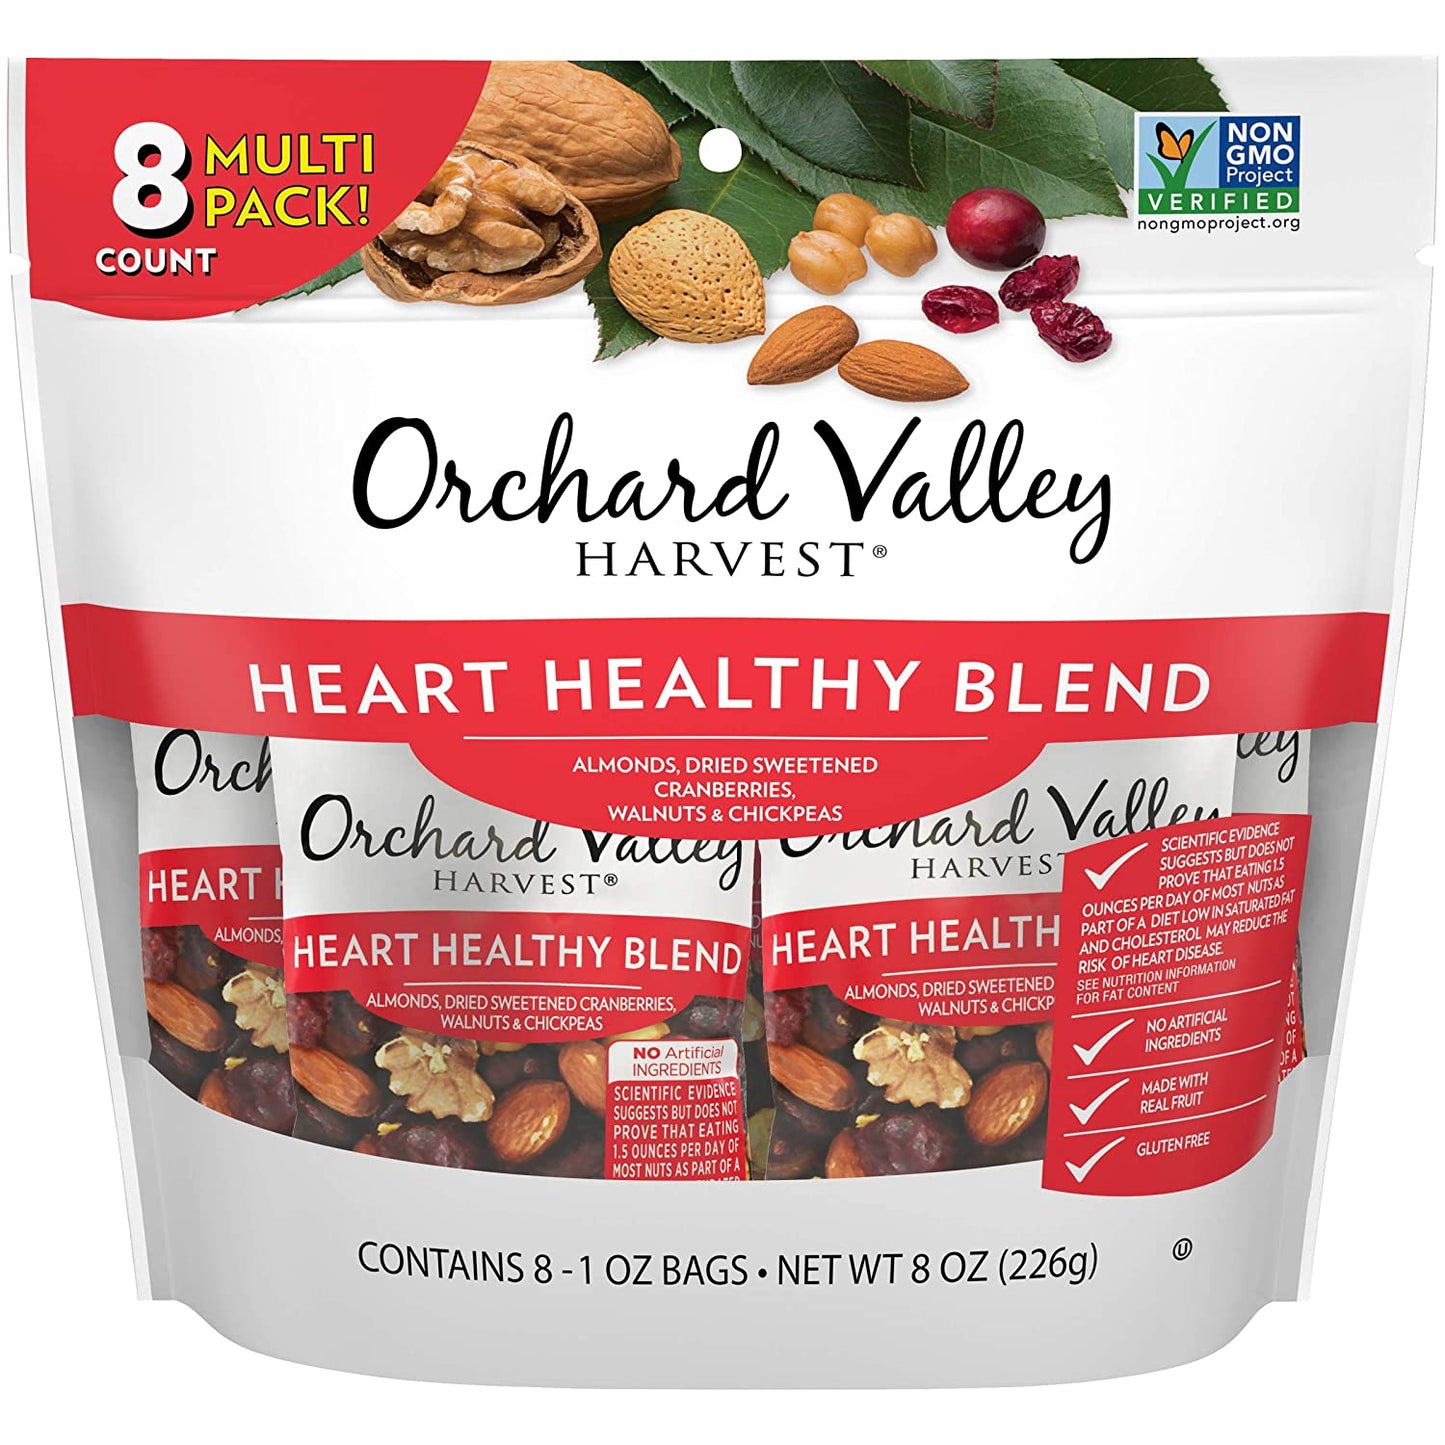 Orchard Valley Harvest Heart Healthy Blend, 1 Ounce Bags (Pack of 8), Almonds, Cranberries, Walnuts, and Chickpeas, Gluten Free, Non-GMO, No Artificial Ingredients